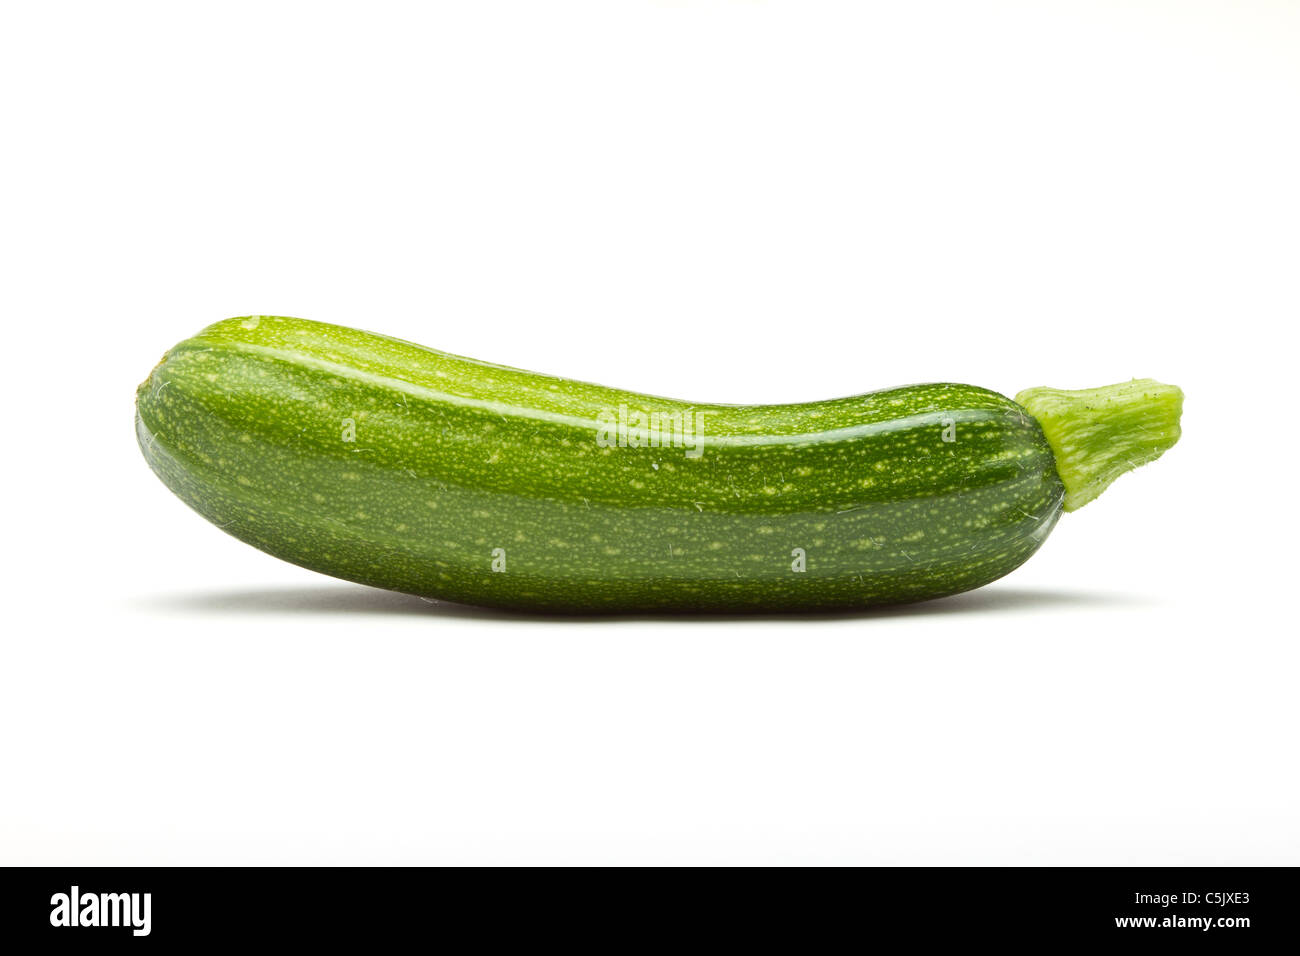 Single Courgette or zucchini from low perspective isolated on white. Stock Photo